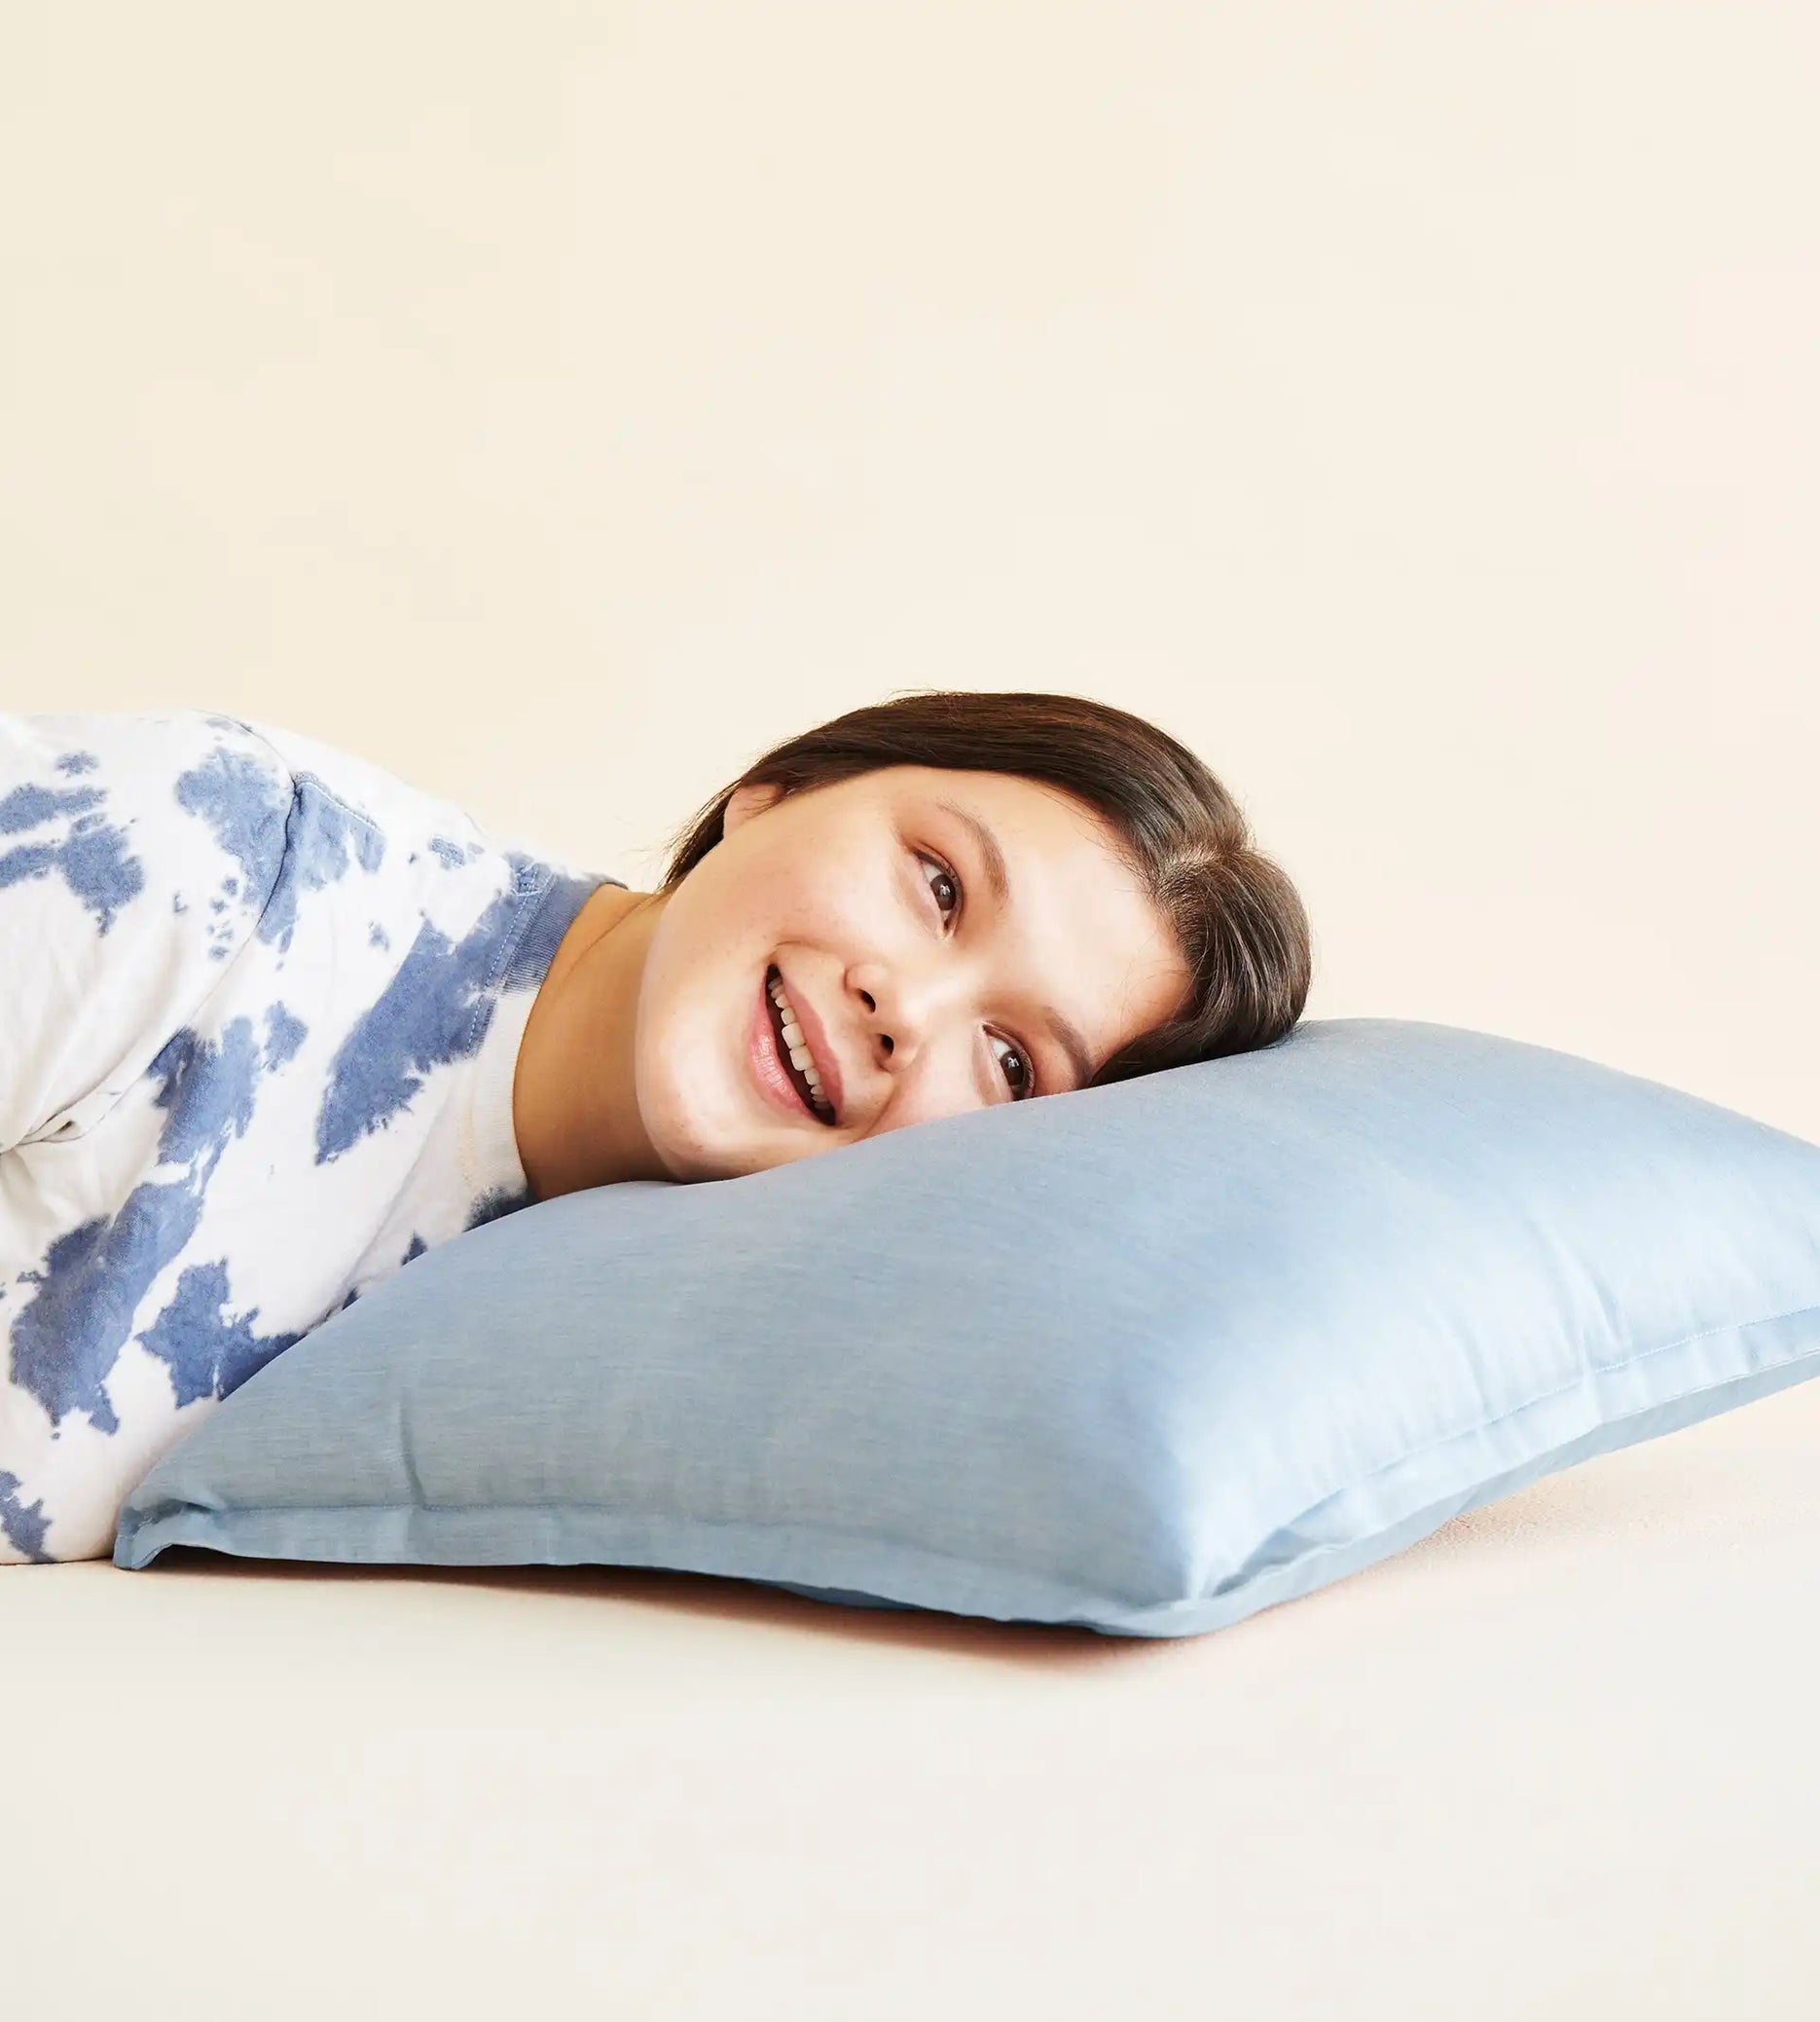 Top 11 Best Pillows for Sitting Up in Bed